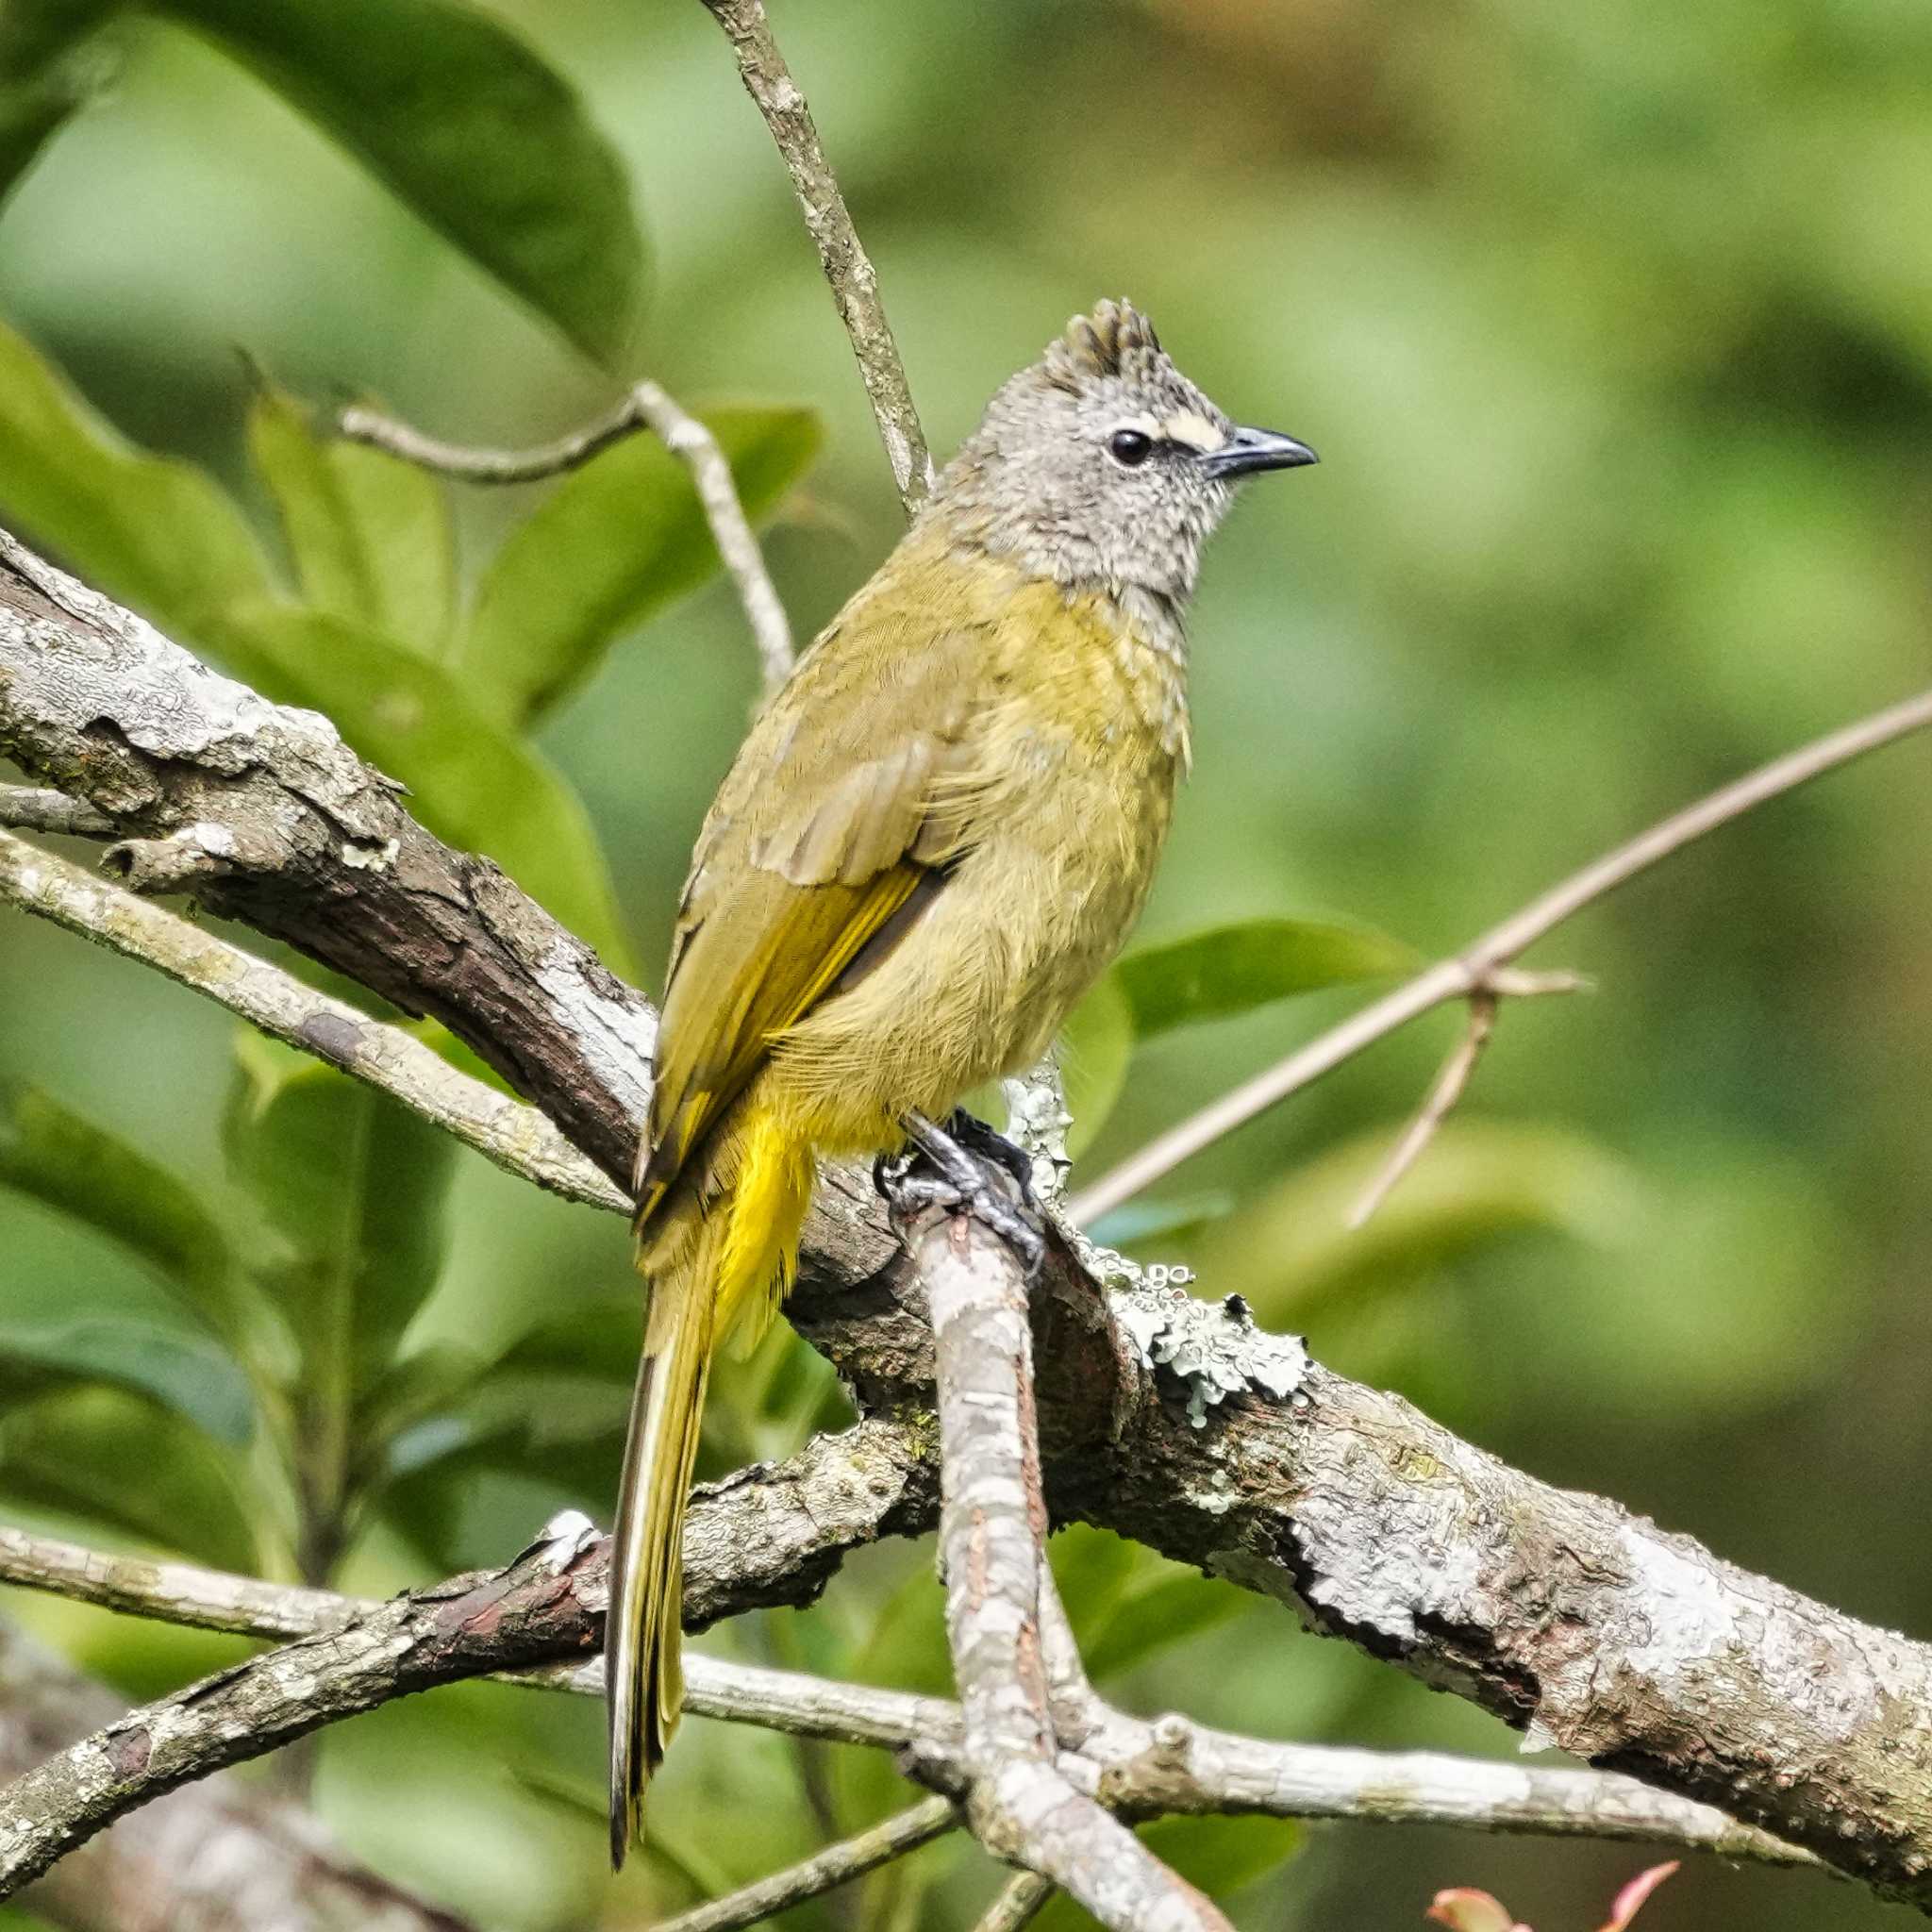 Photo of Flavescent Bulbul at Phu Luang Wildlife Sanctuary by span265